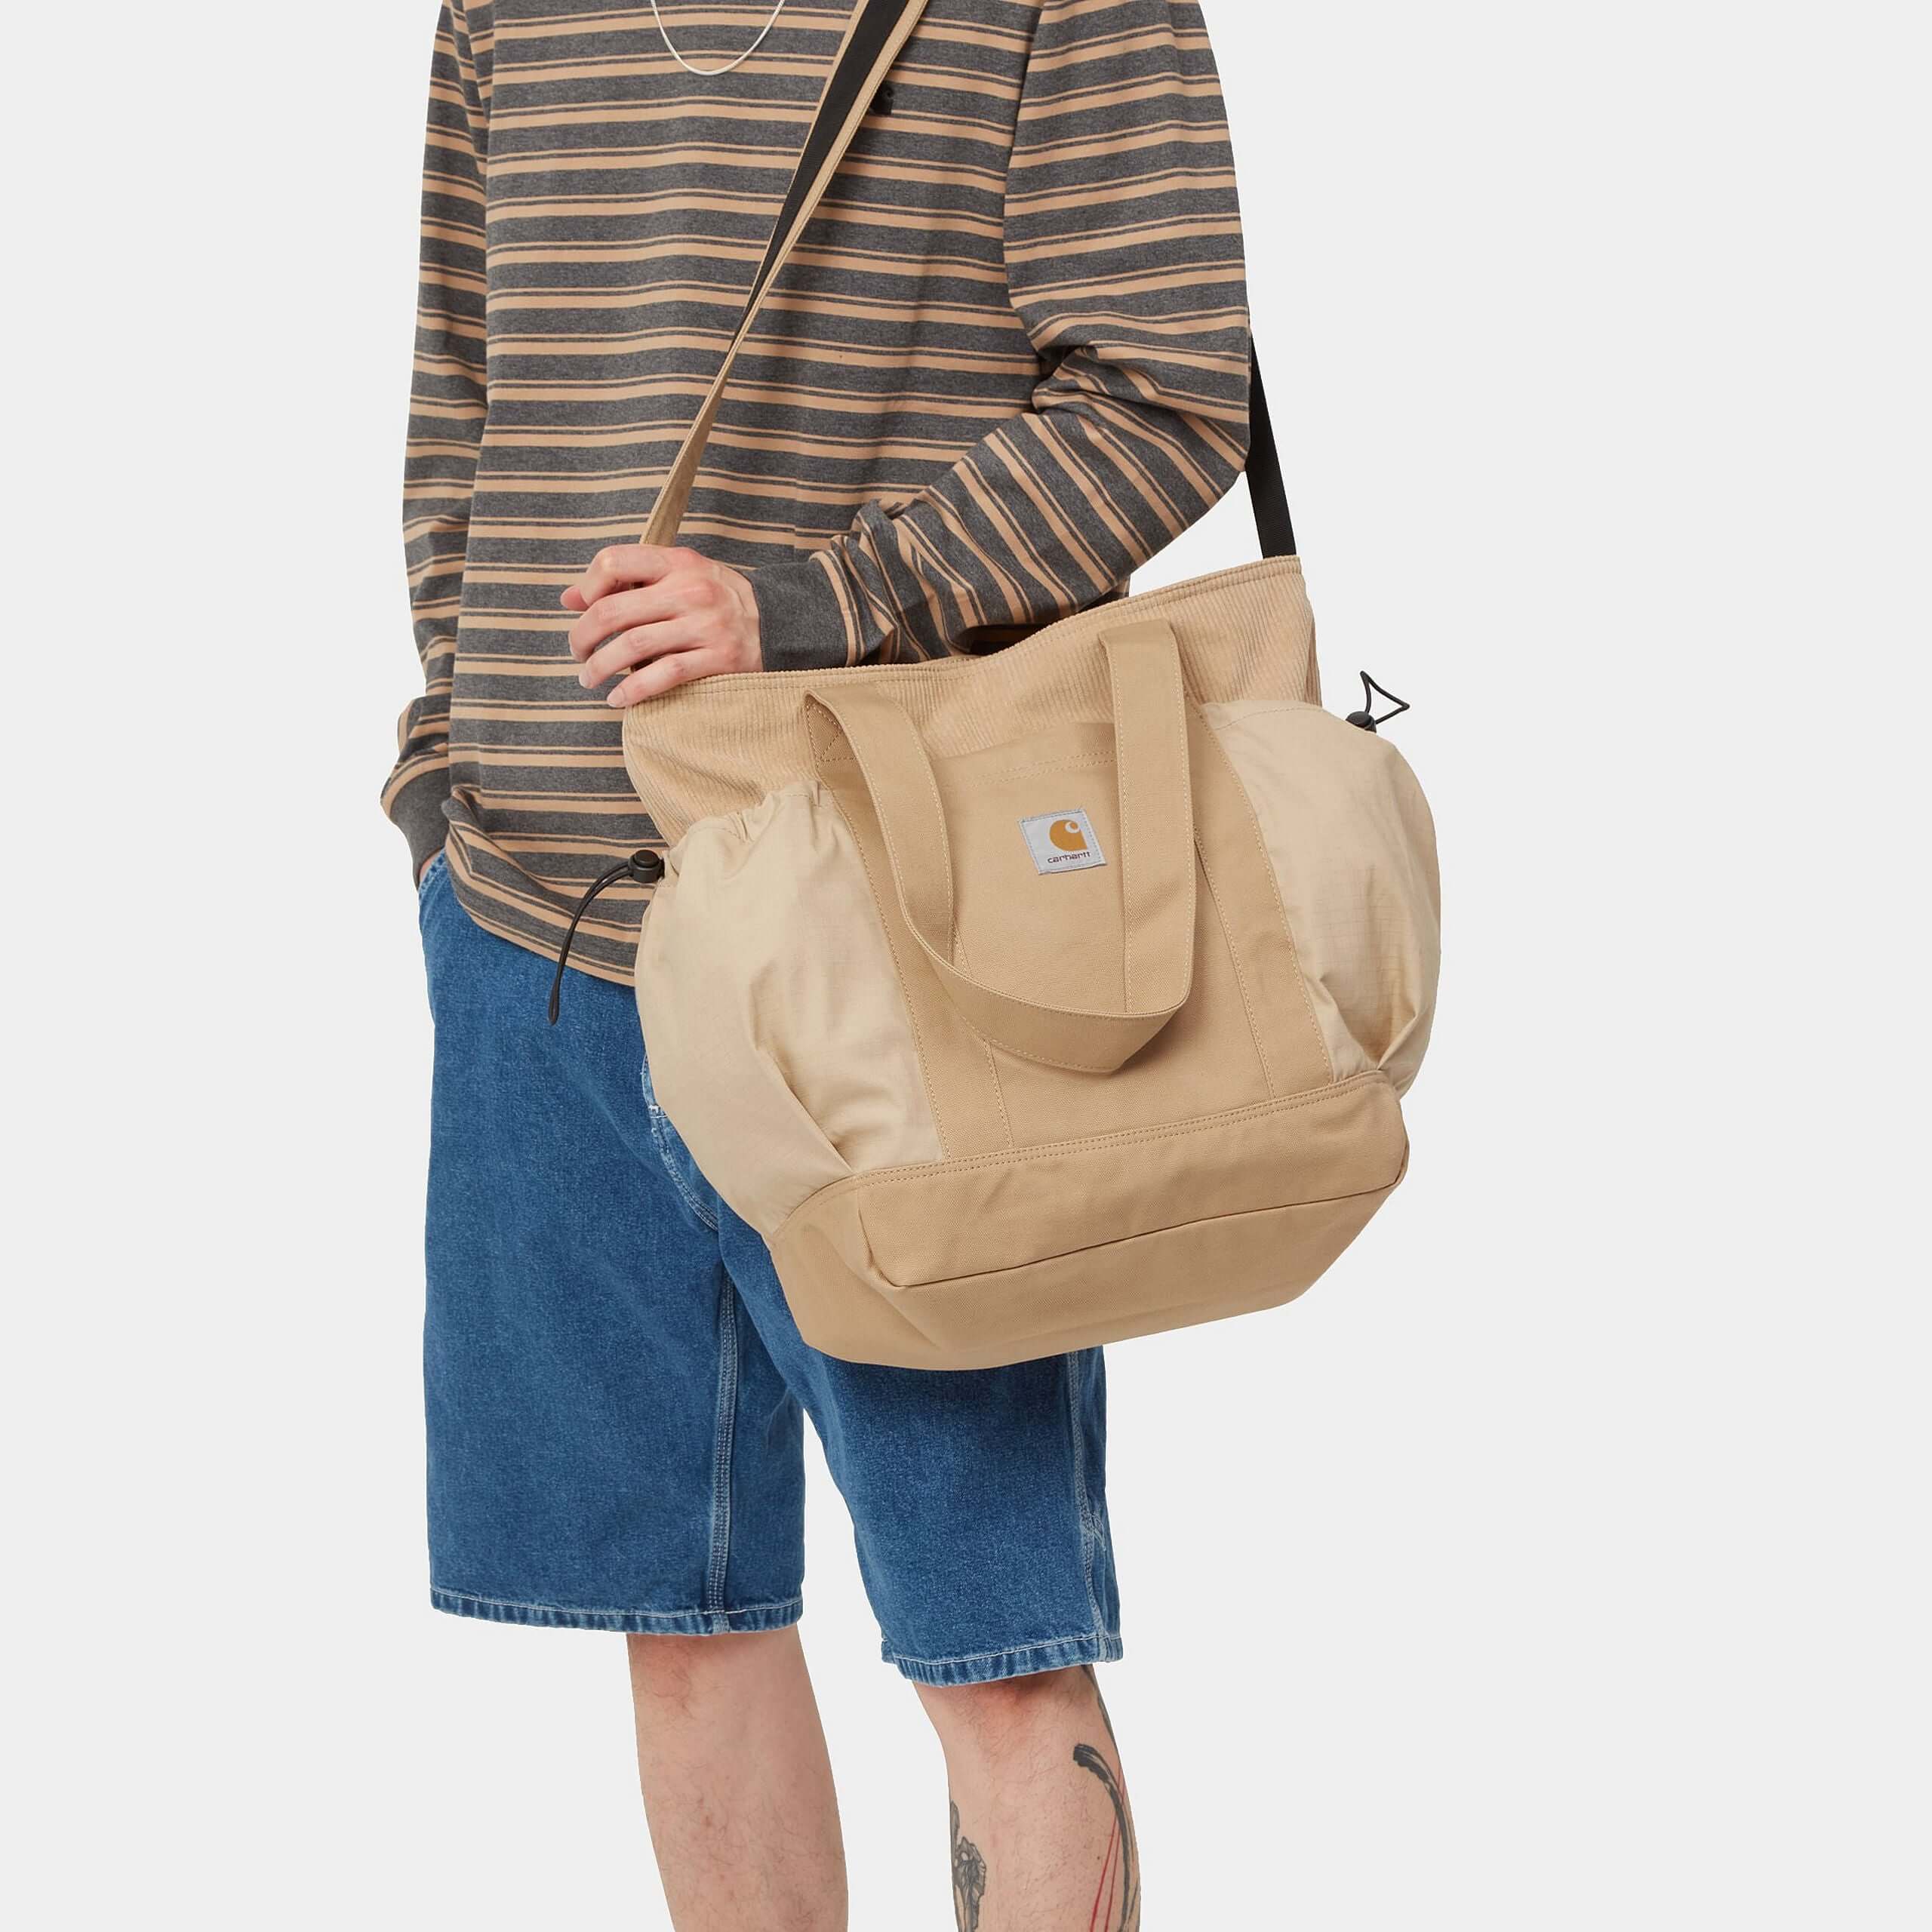 Carhartt WIP Medley Tote Bag: Dusty Hamilton Brown | Carhartt WIP | The Union Project